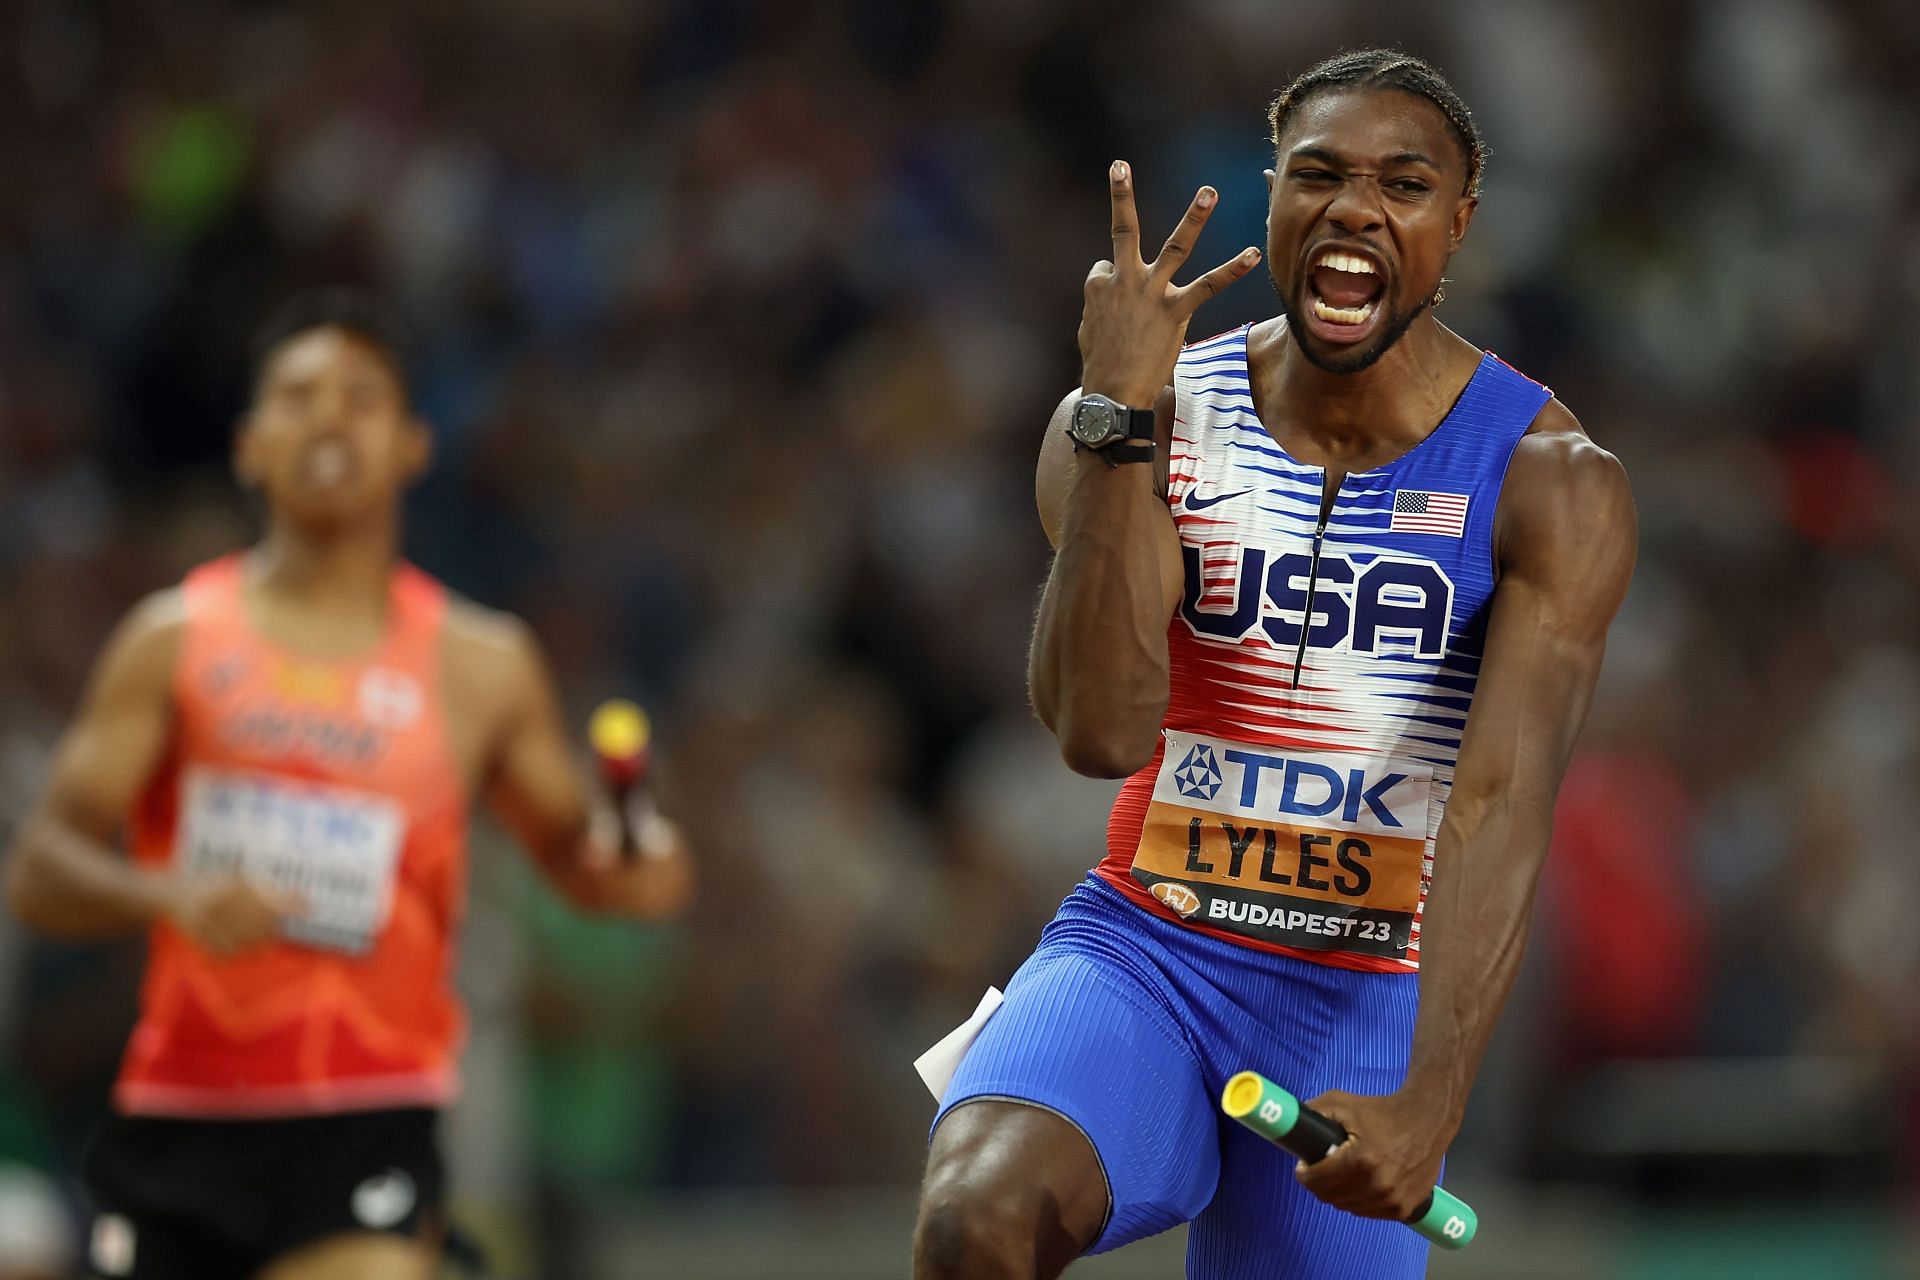 Noah Lyles celebrates after winning his third gold medal in the men's 4x100m at the 2023 World Athletics Championships in Budapest, Hungary